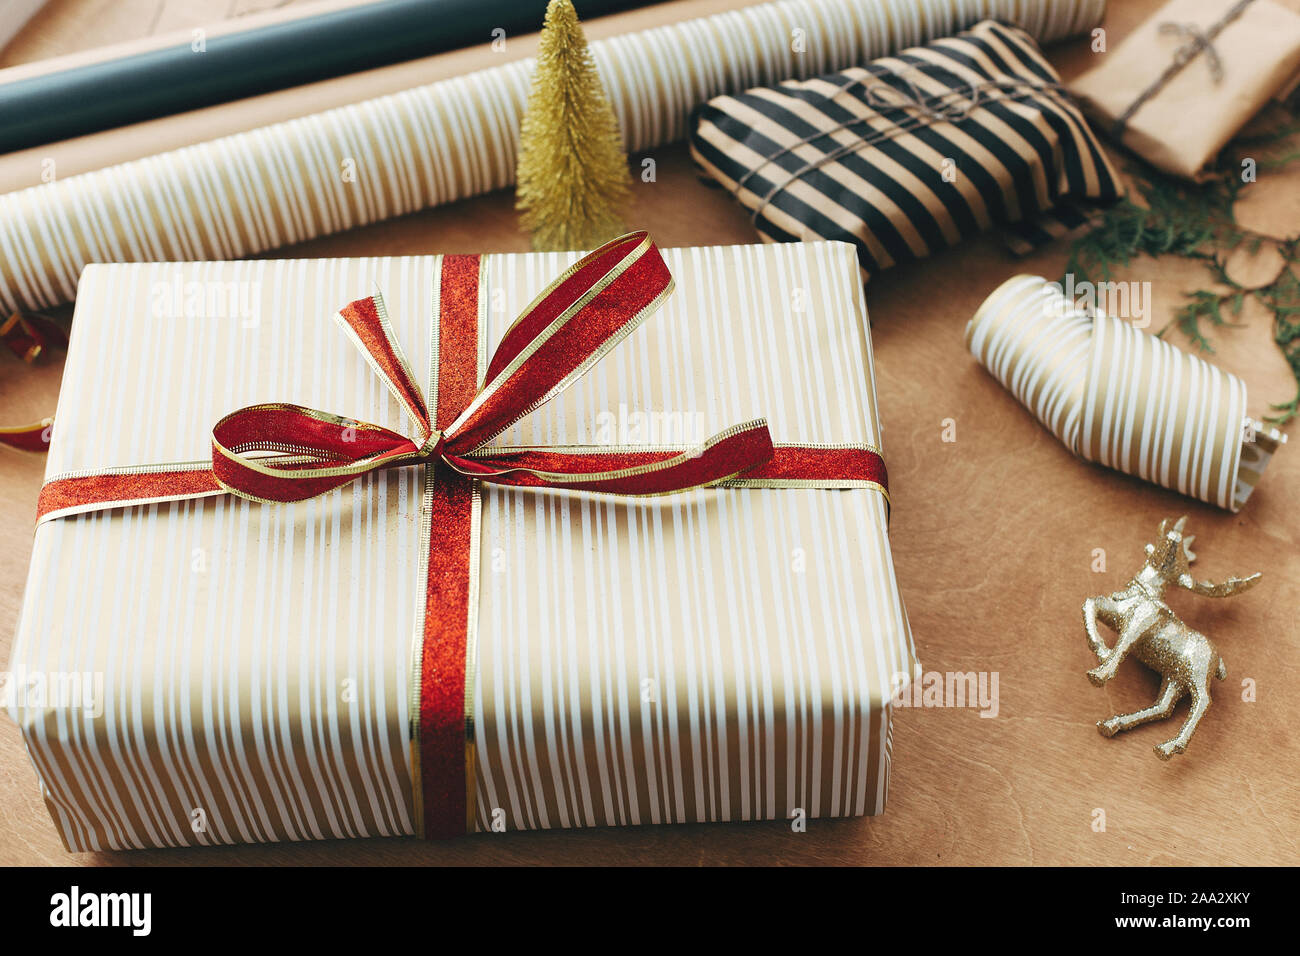 https://c8.alamy.com/comp/2AA2XKY/stylish-christmas-gift-box-in-striped-golden-paper-and-with-red-bow-and-scissors-presents-golden-tree-deer-on-wooden-table-wrapping-christmas-gif-2AA2XKY.jpg